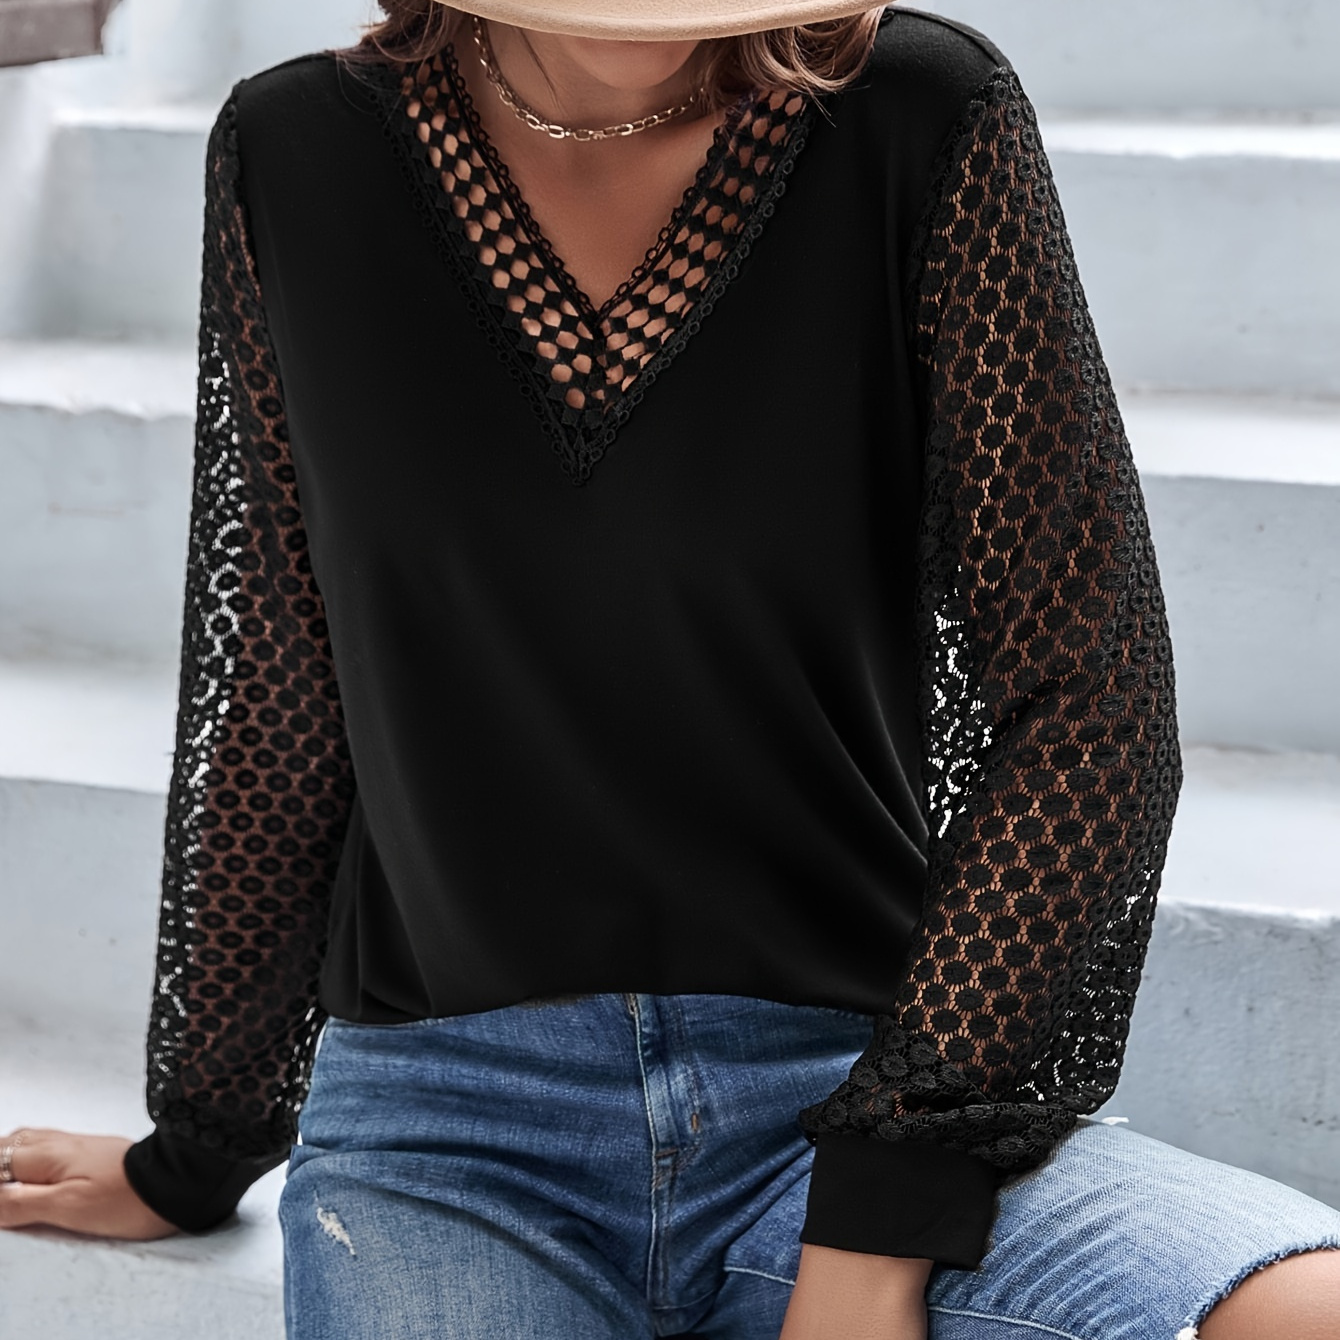 

Solid Color V Neck Knitting T-shirt, Elegant Contrast Lace Cut Out Long Sleeve T-shirt For Spring & Fall, Women's Clothing